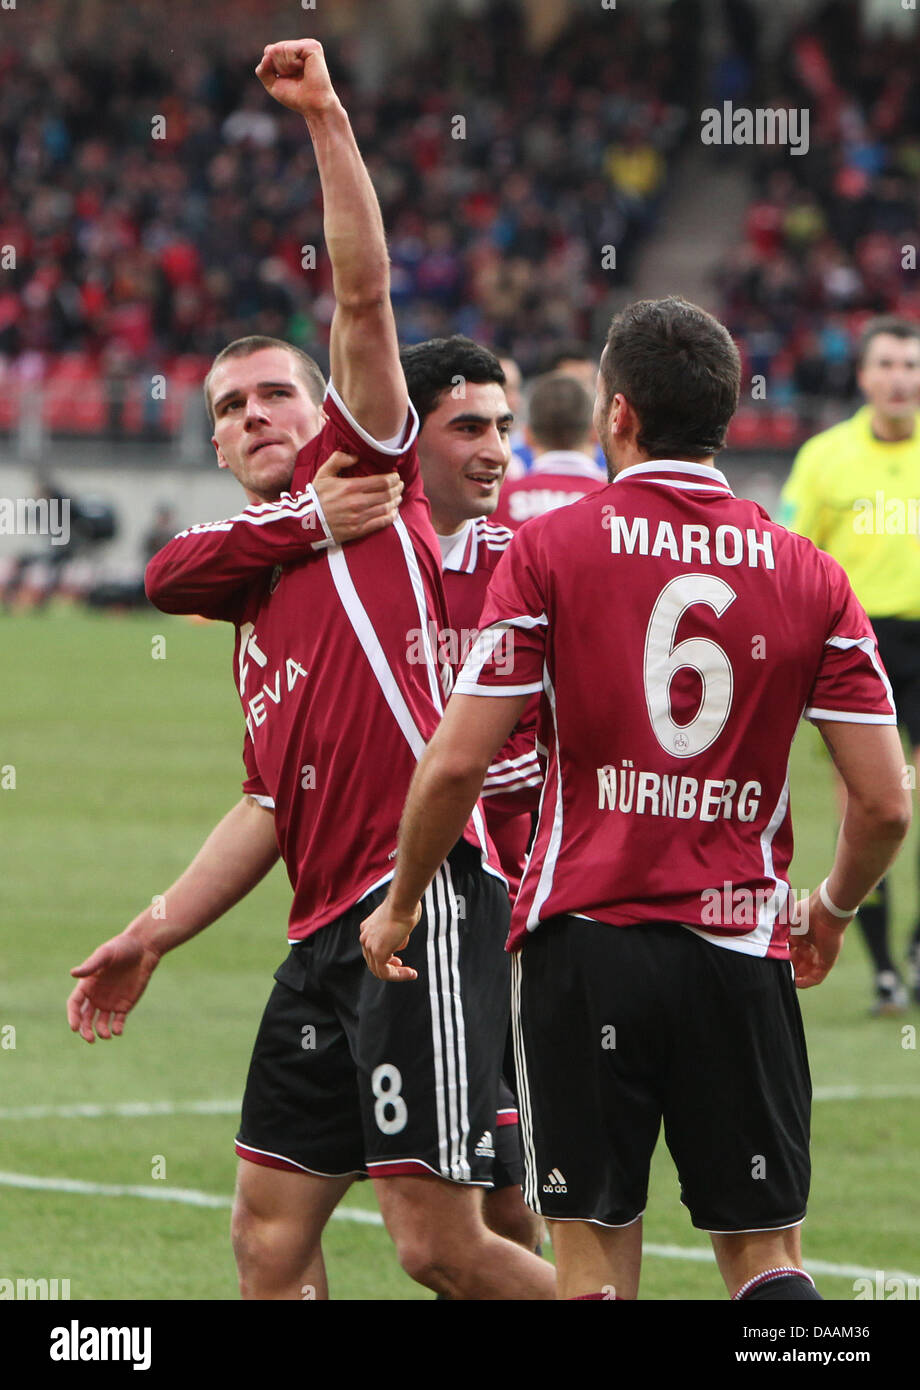 Nuremberg's Christian Eigler (L) celebrates together with his teammates Mehmet Ekici (C) and Dominic Maroh after scoring the 1-0 goal during the Bundesliga soccer match between 1st FC Nuremberg and Bayer 04 Leverkusen at the easyCredit Stadion in Nuremberg, Germany, 5 February 2011. Photo: Daniel Karmann Stock Photo